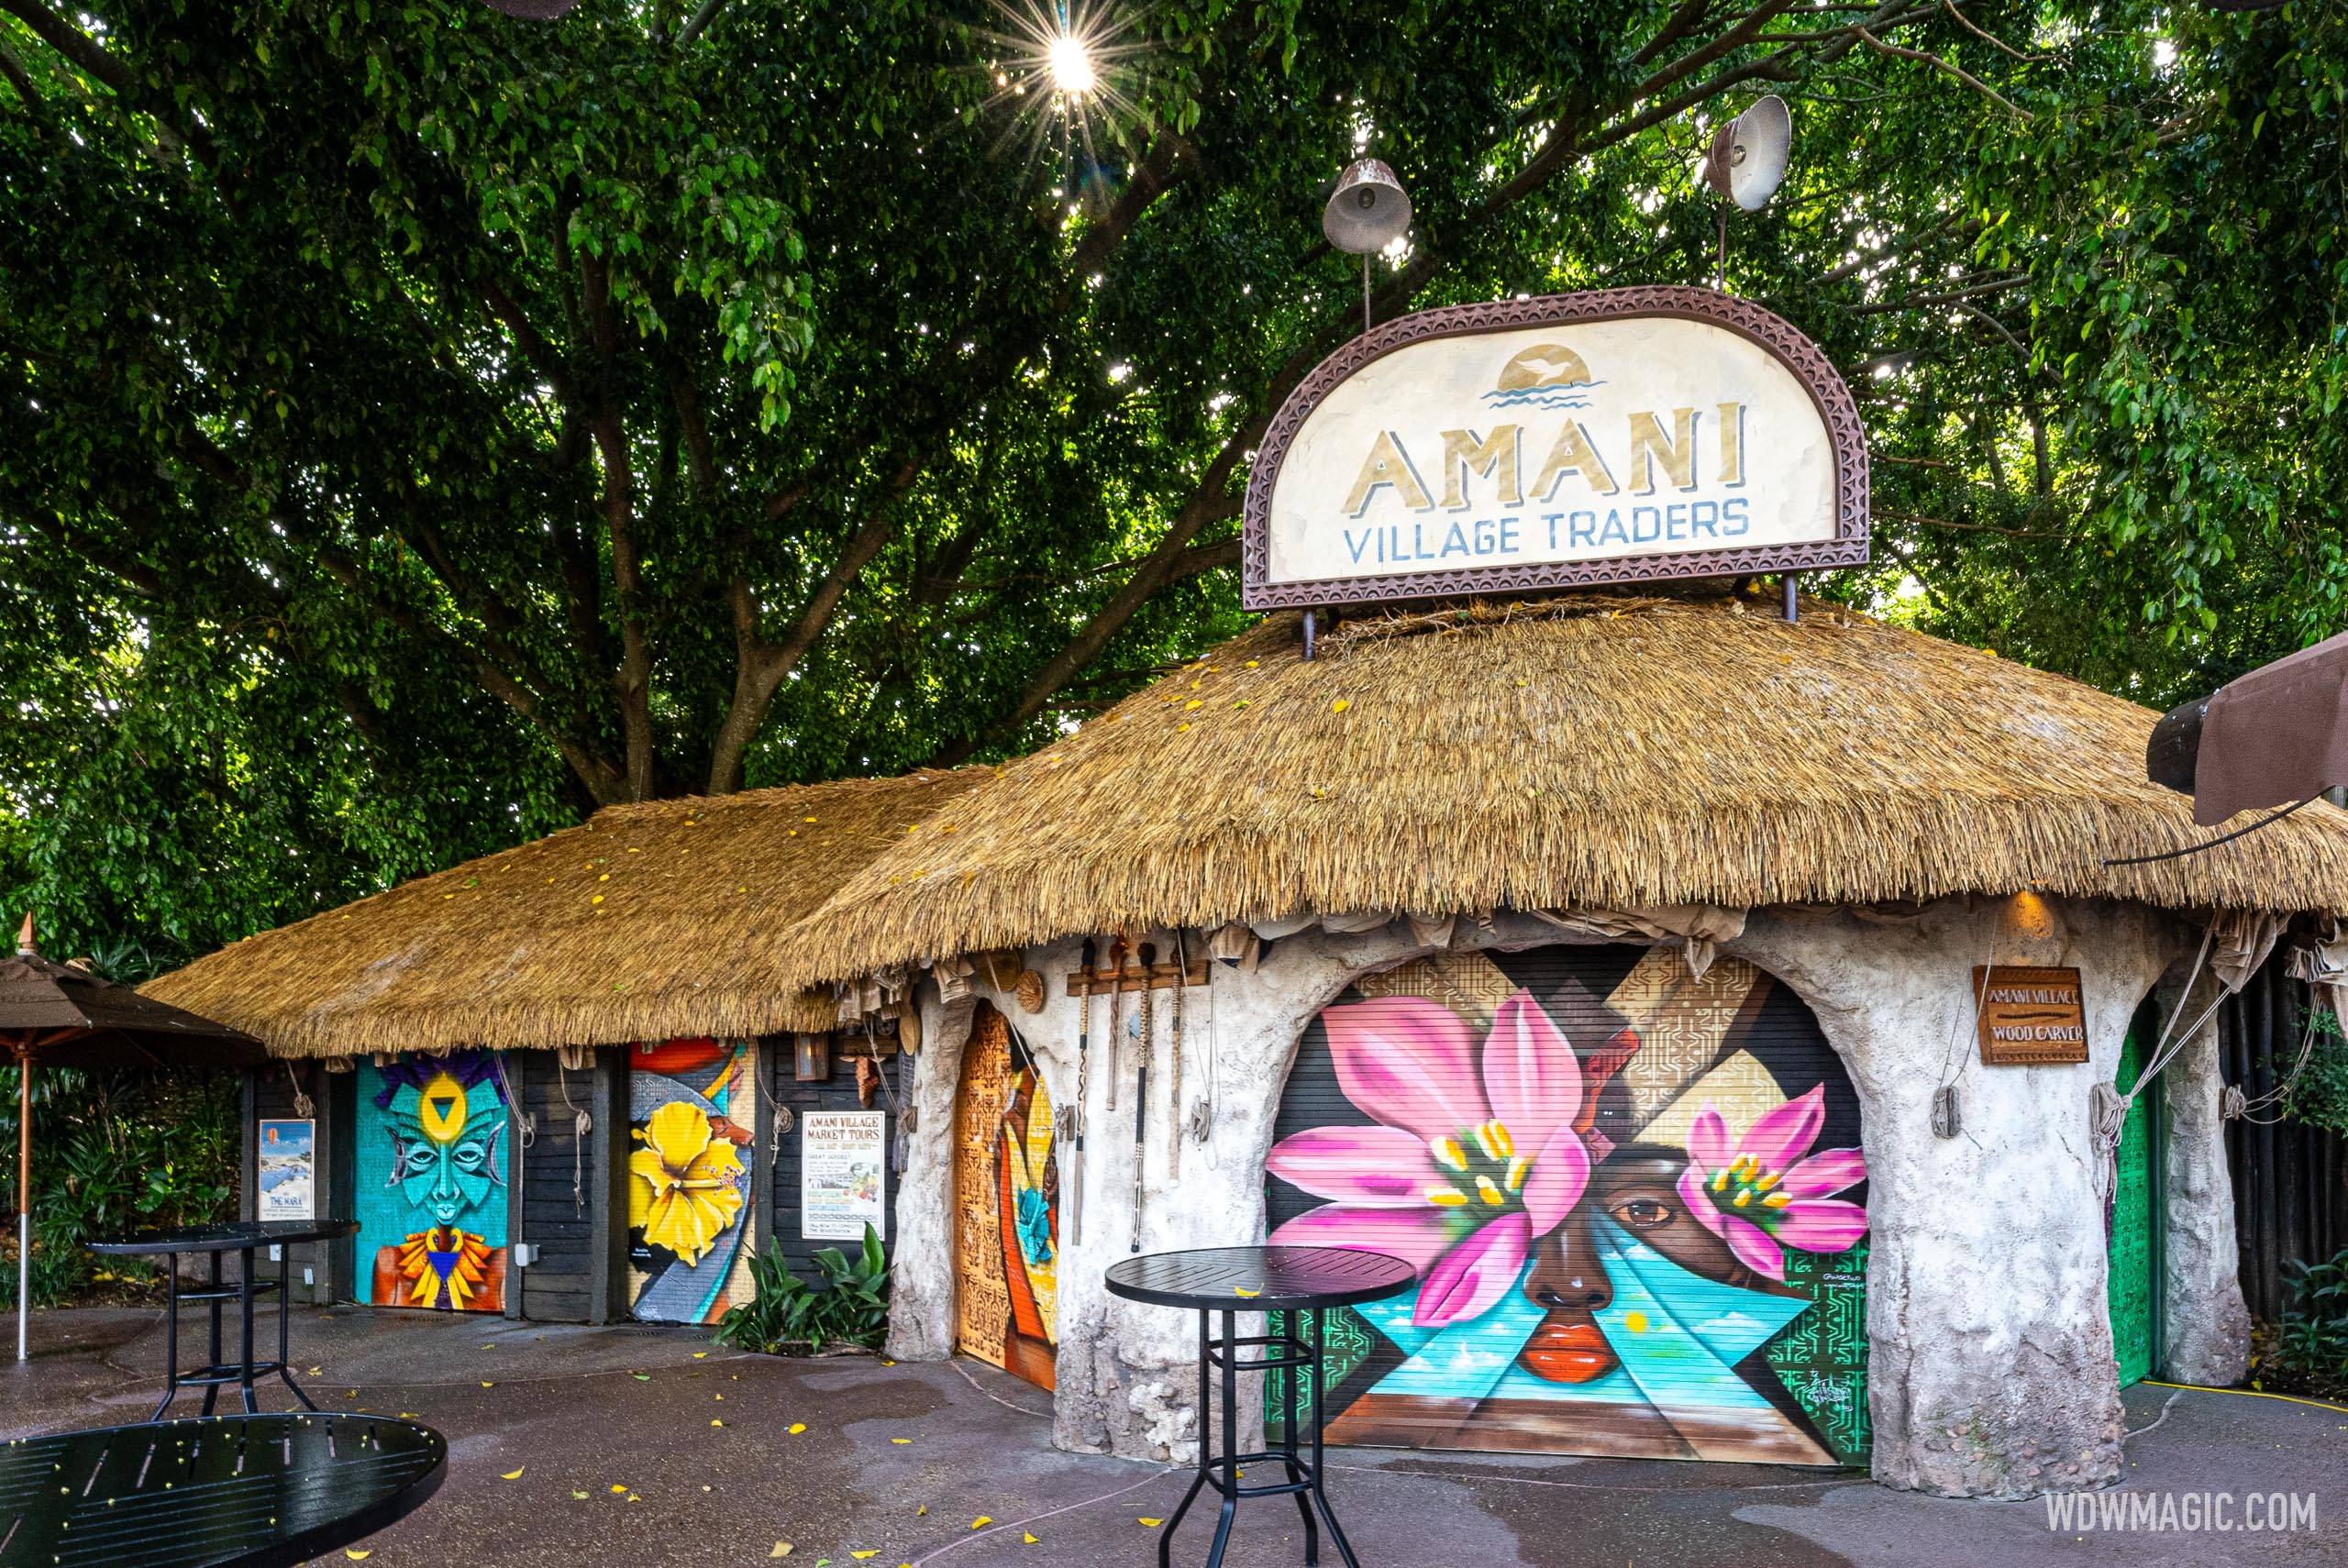 Amani Village Traders in EPCOT's World Showcase gets a new look with vibrant murals